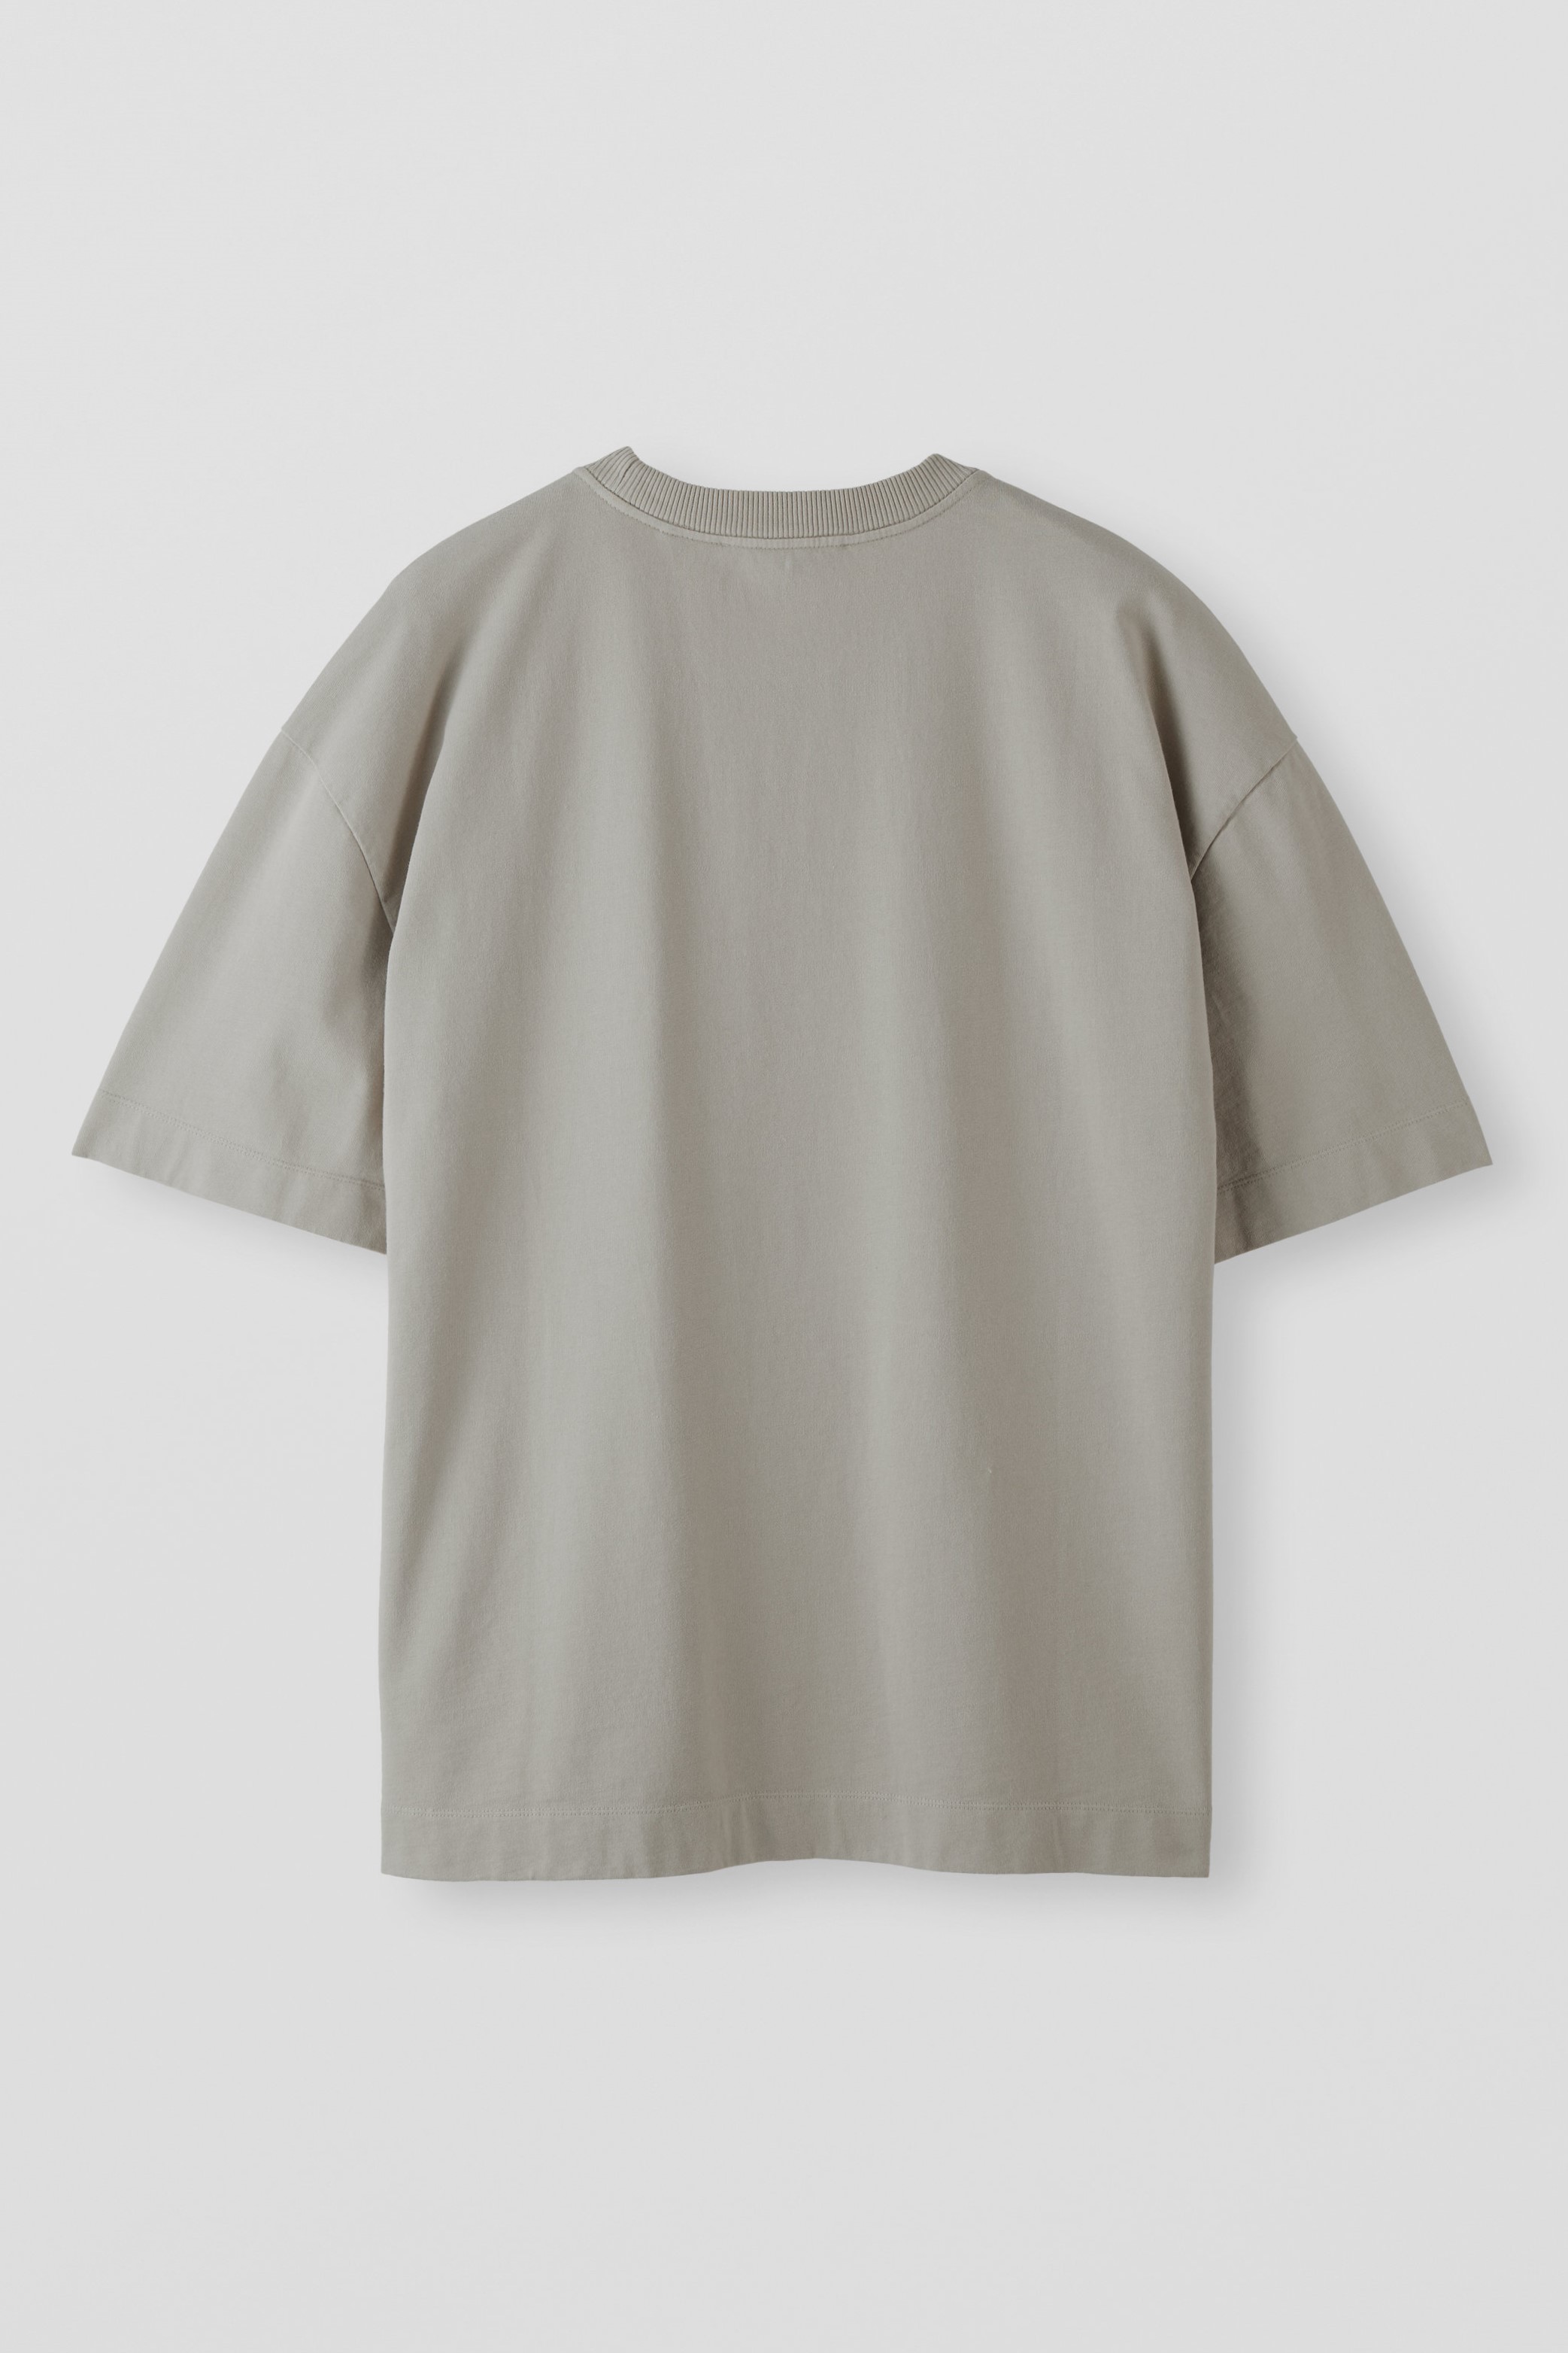 APPLIED ART FORMS Oversize T-Shirt in Ghost Grey XXL